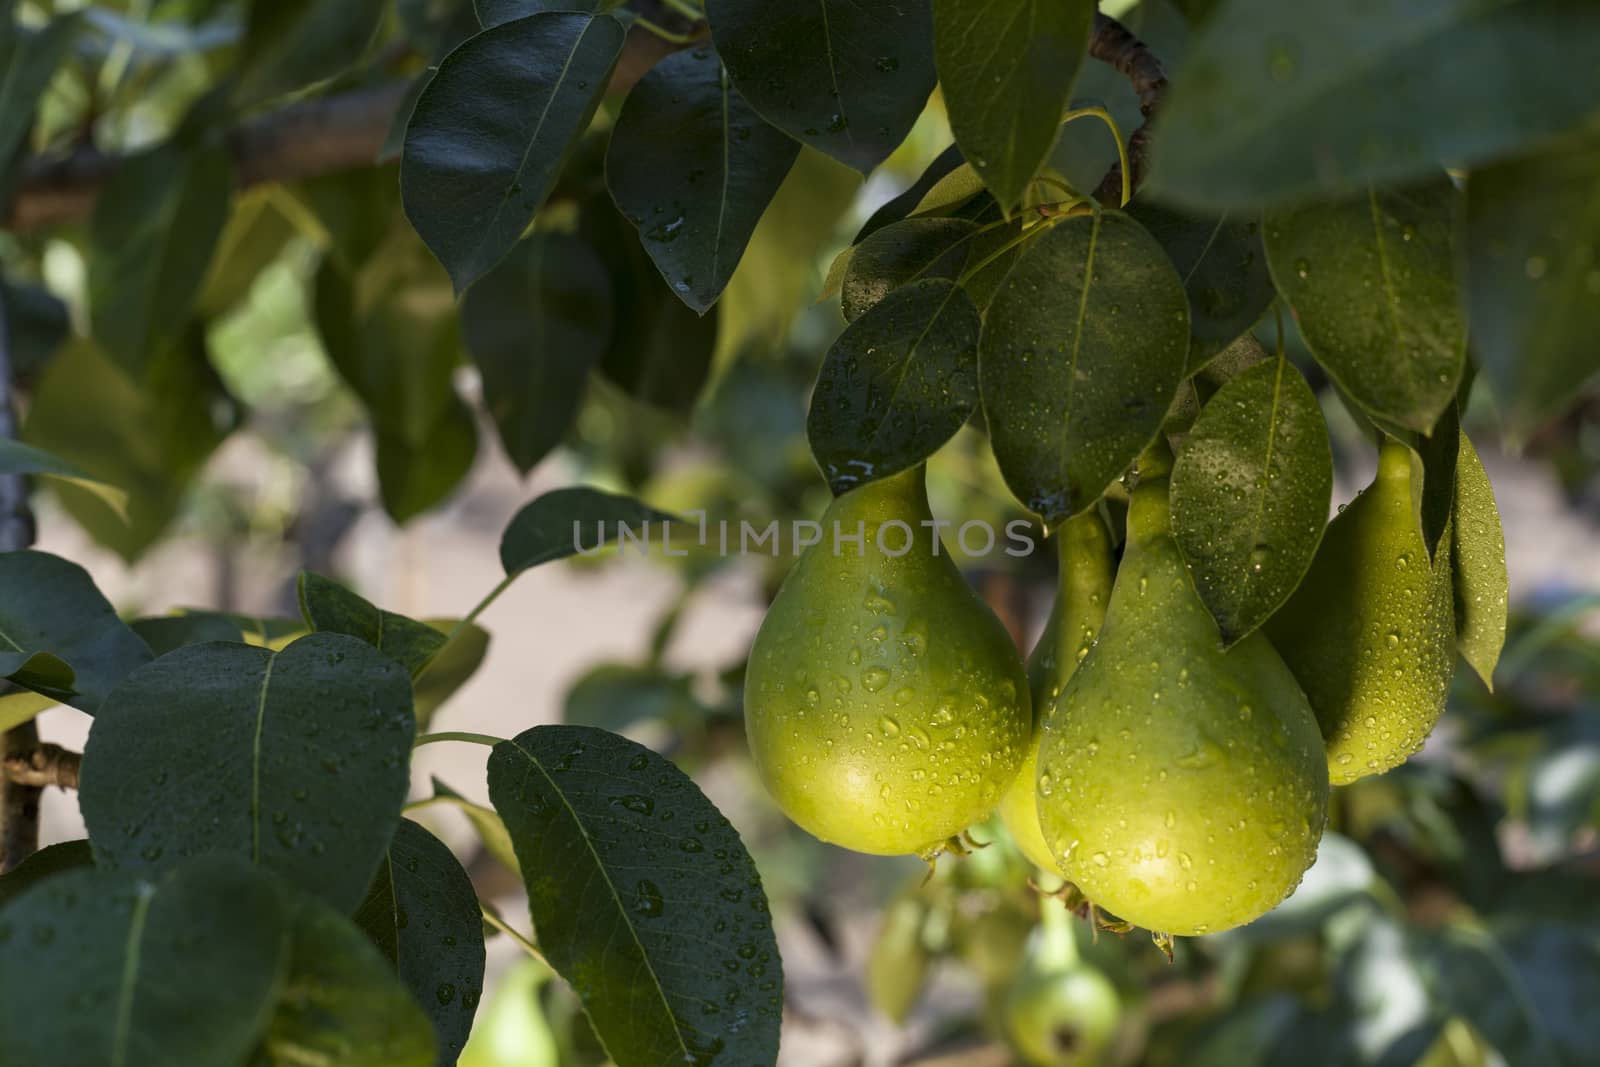 green pears hanging on a branch with lefs in the background